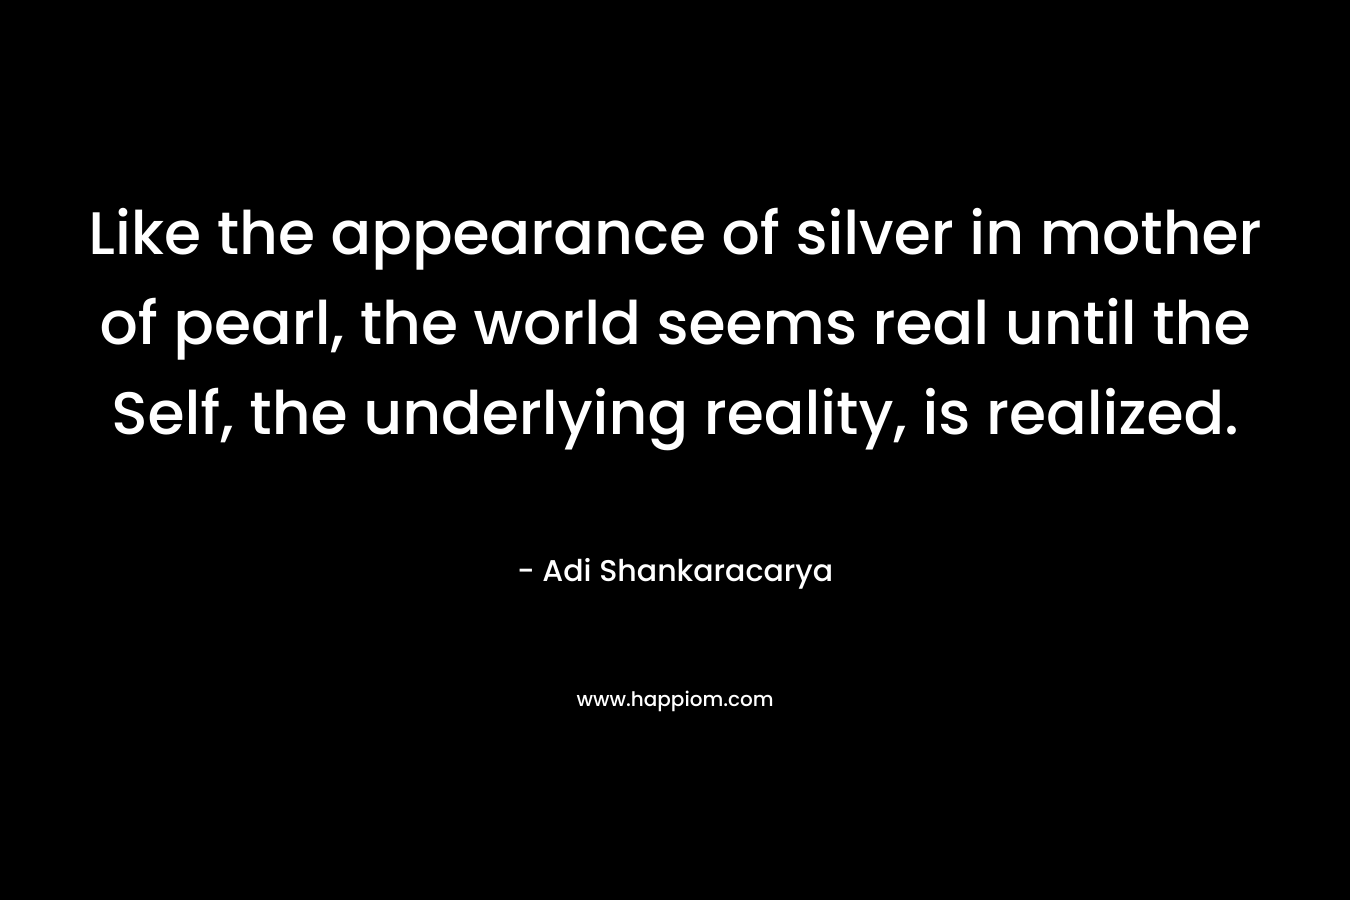 Like the appearance of silver in mother of pearl, the world seems real until the Self, the underlying reality, is realized.